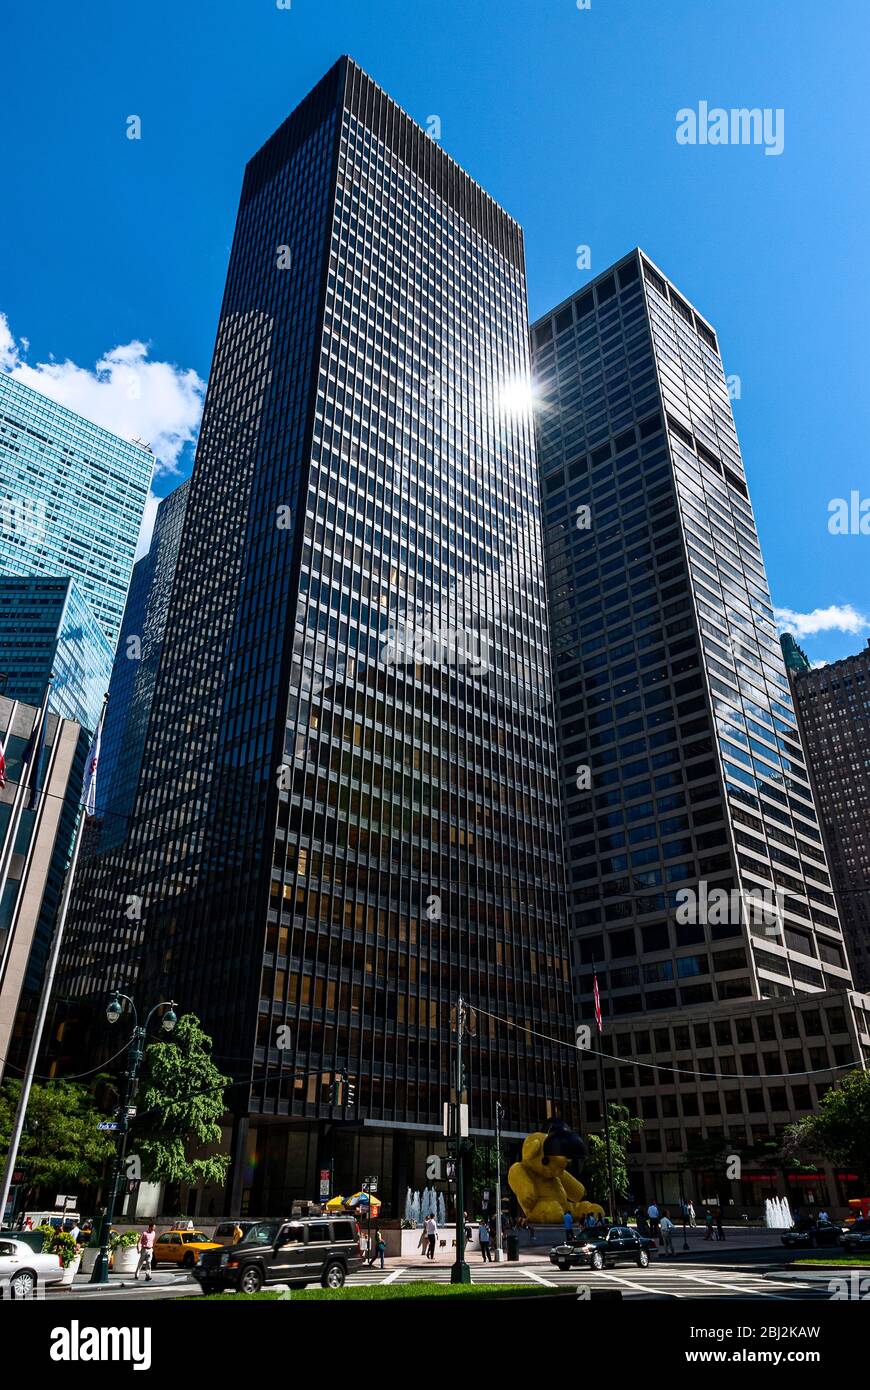 Seagram Building Ludwig Mies van der Rohe Philip Johnson New York City Banque D'Images